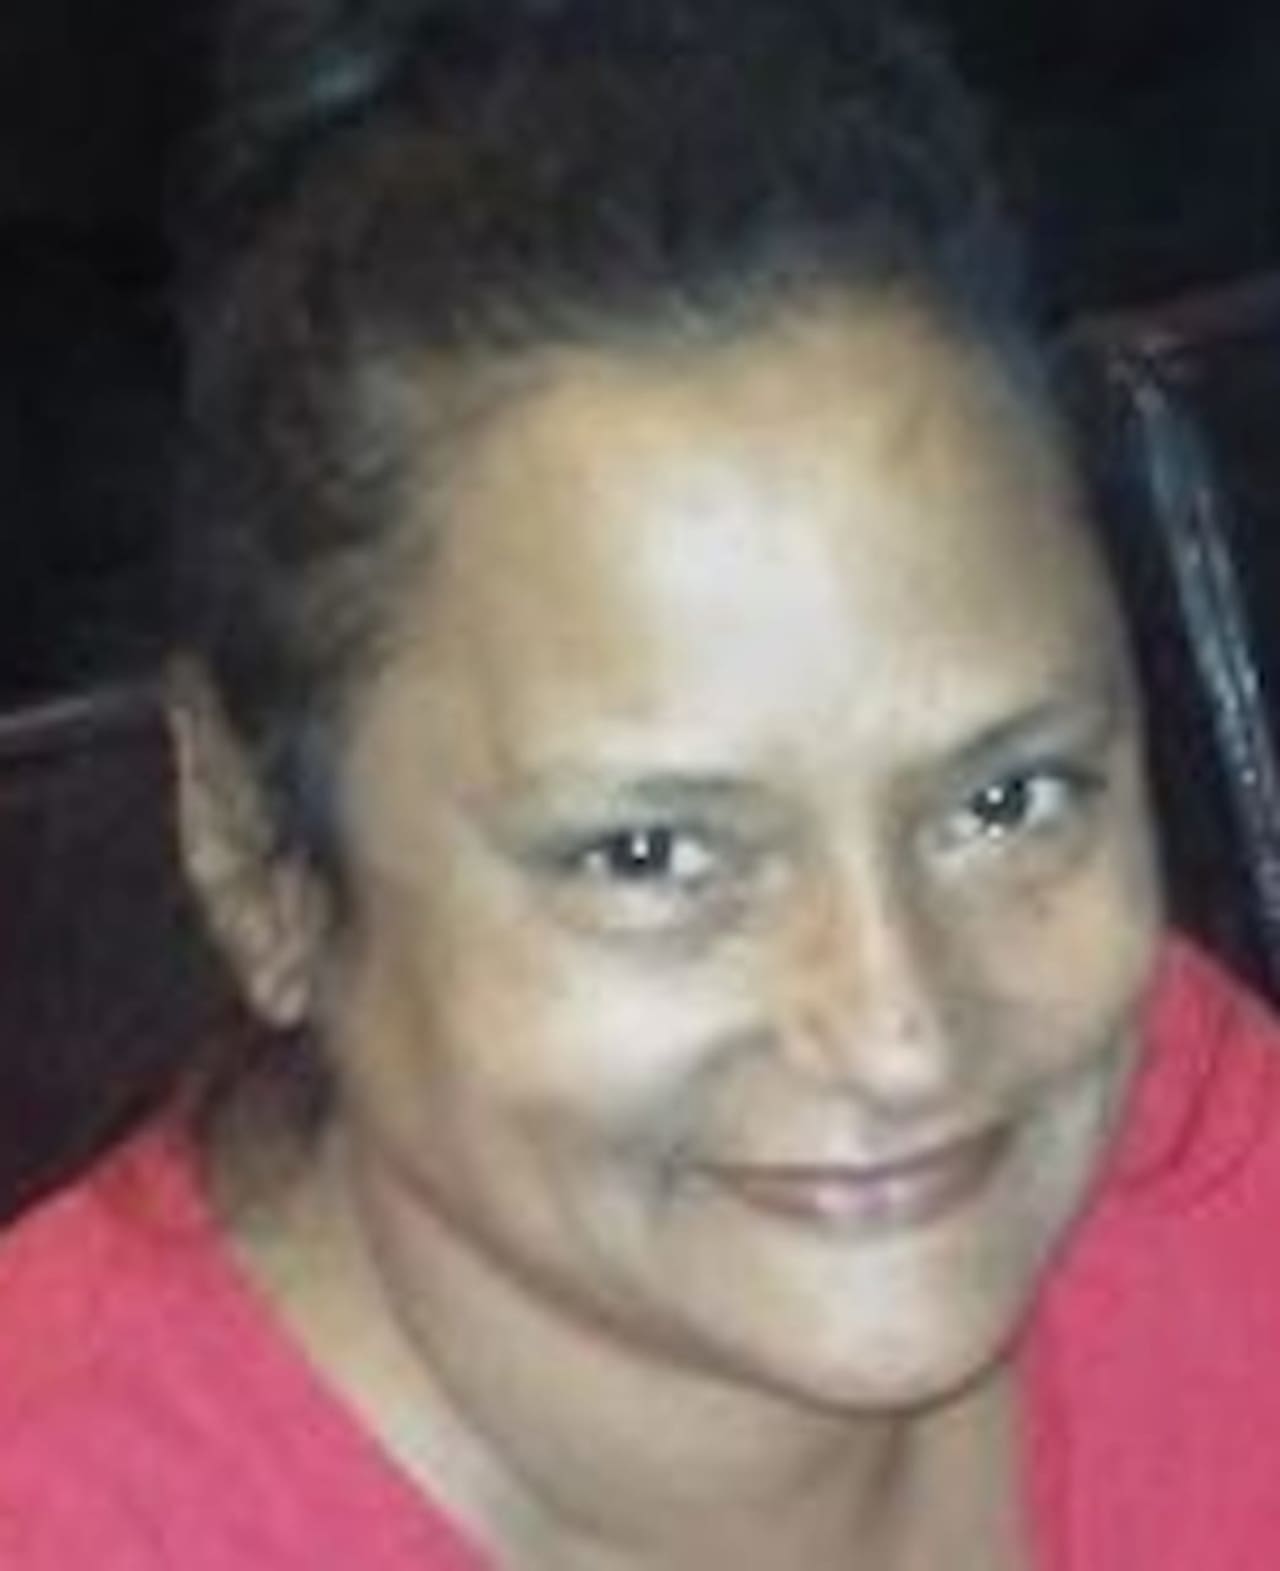 Laura Gines was reported missing last night in Long Island and could be in the Hudson Valley.